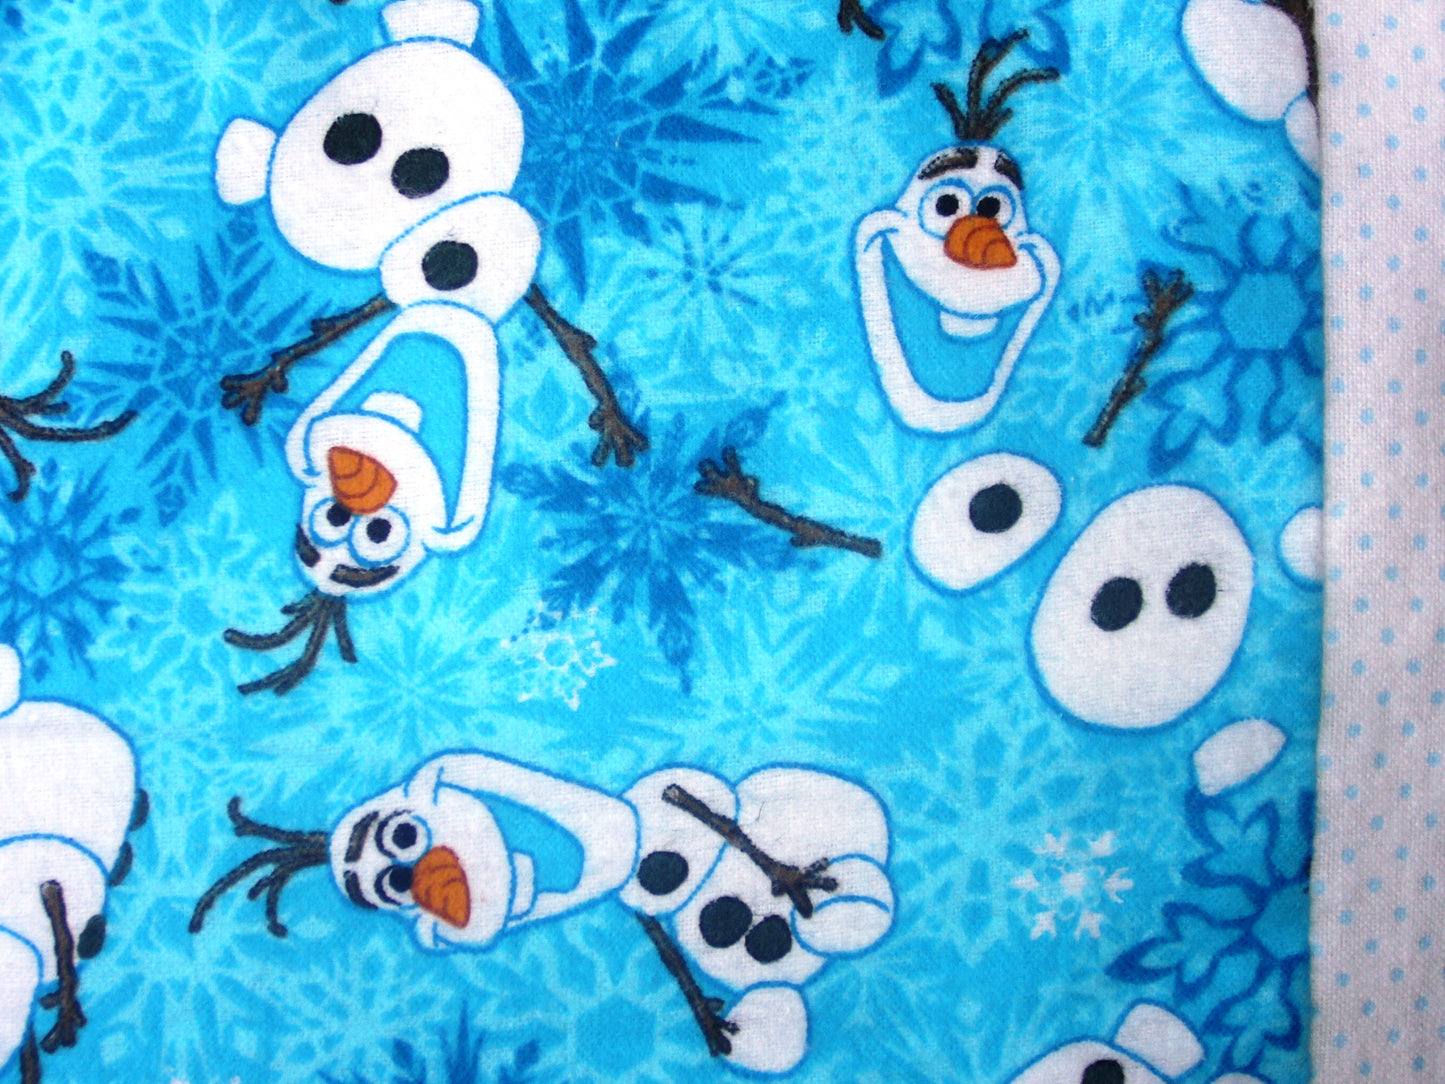 FROZEN SISTERS OLAF inspired Quilted Soft Flannel Blanket Baby Nursery Child Toddler Bedding to Adult Lap Blanket